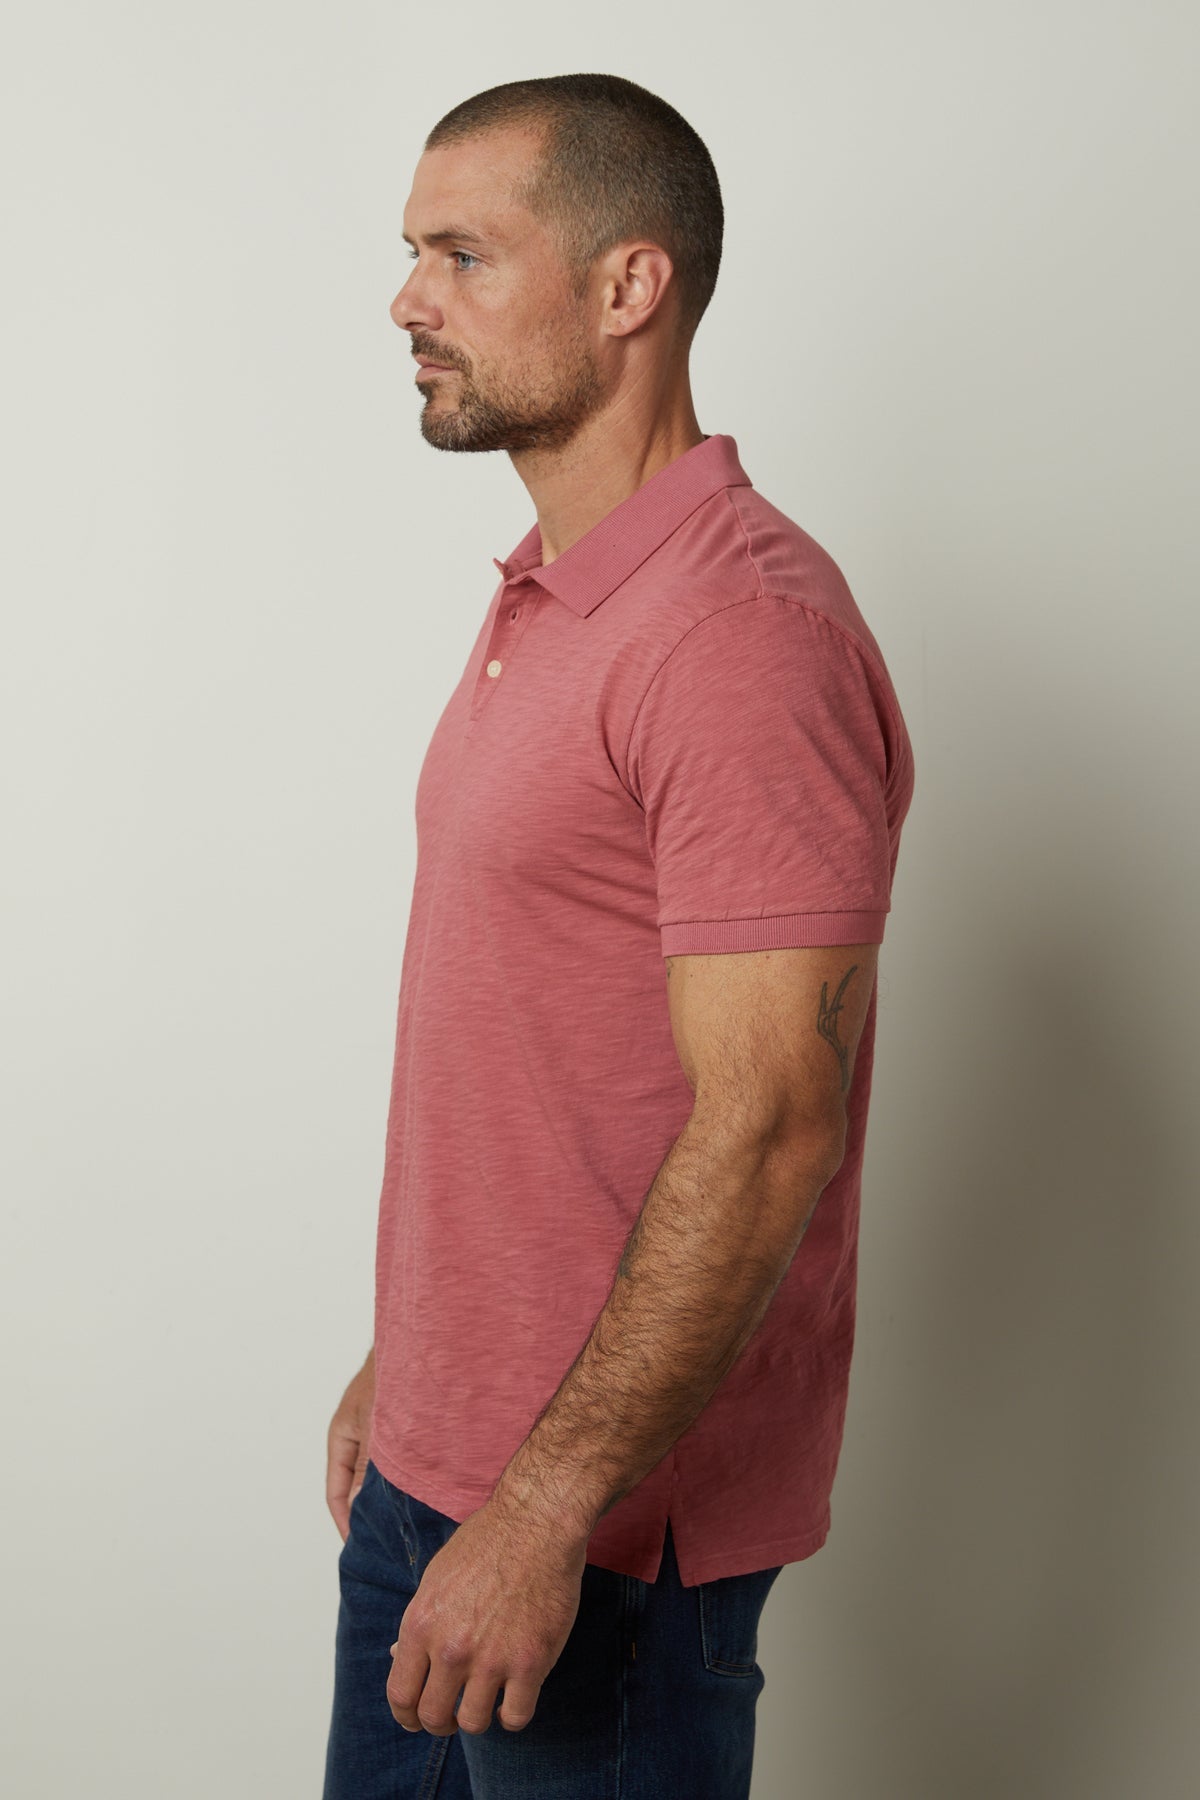   A man wearing a NIKO POLO shirt from Velvet by Graham & Spencer and jeans. 